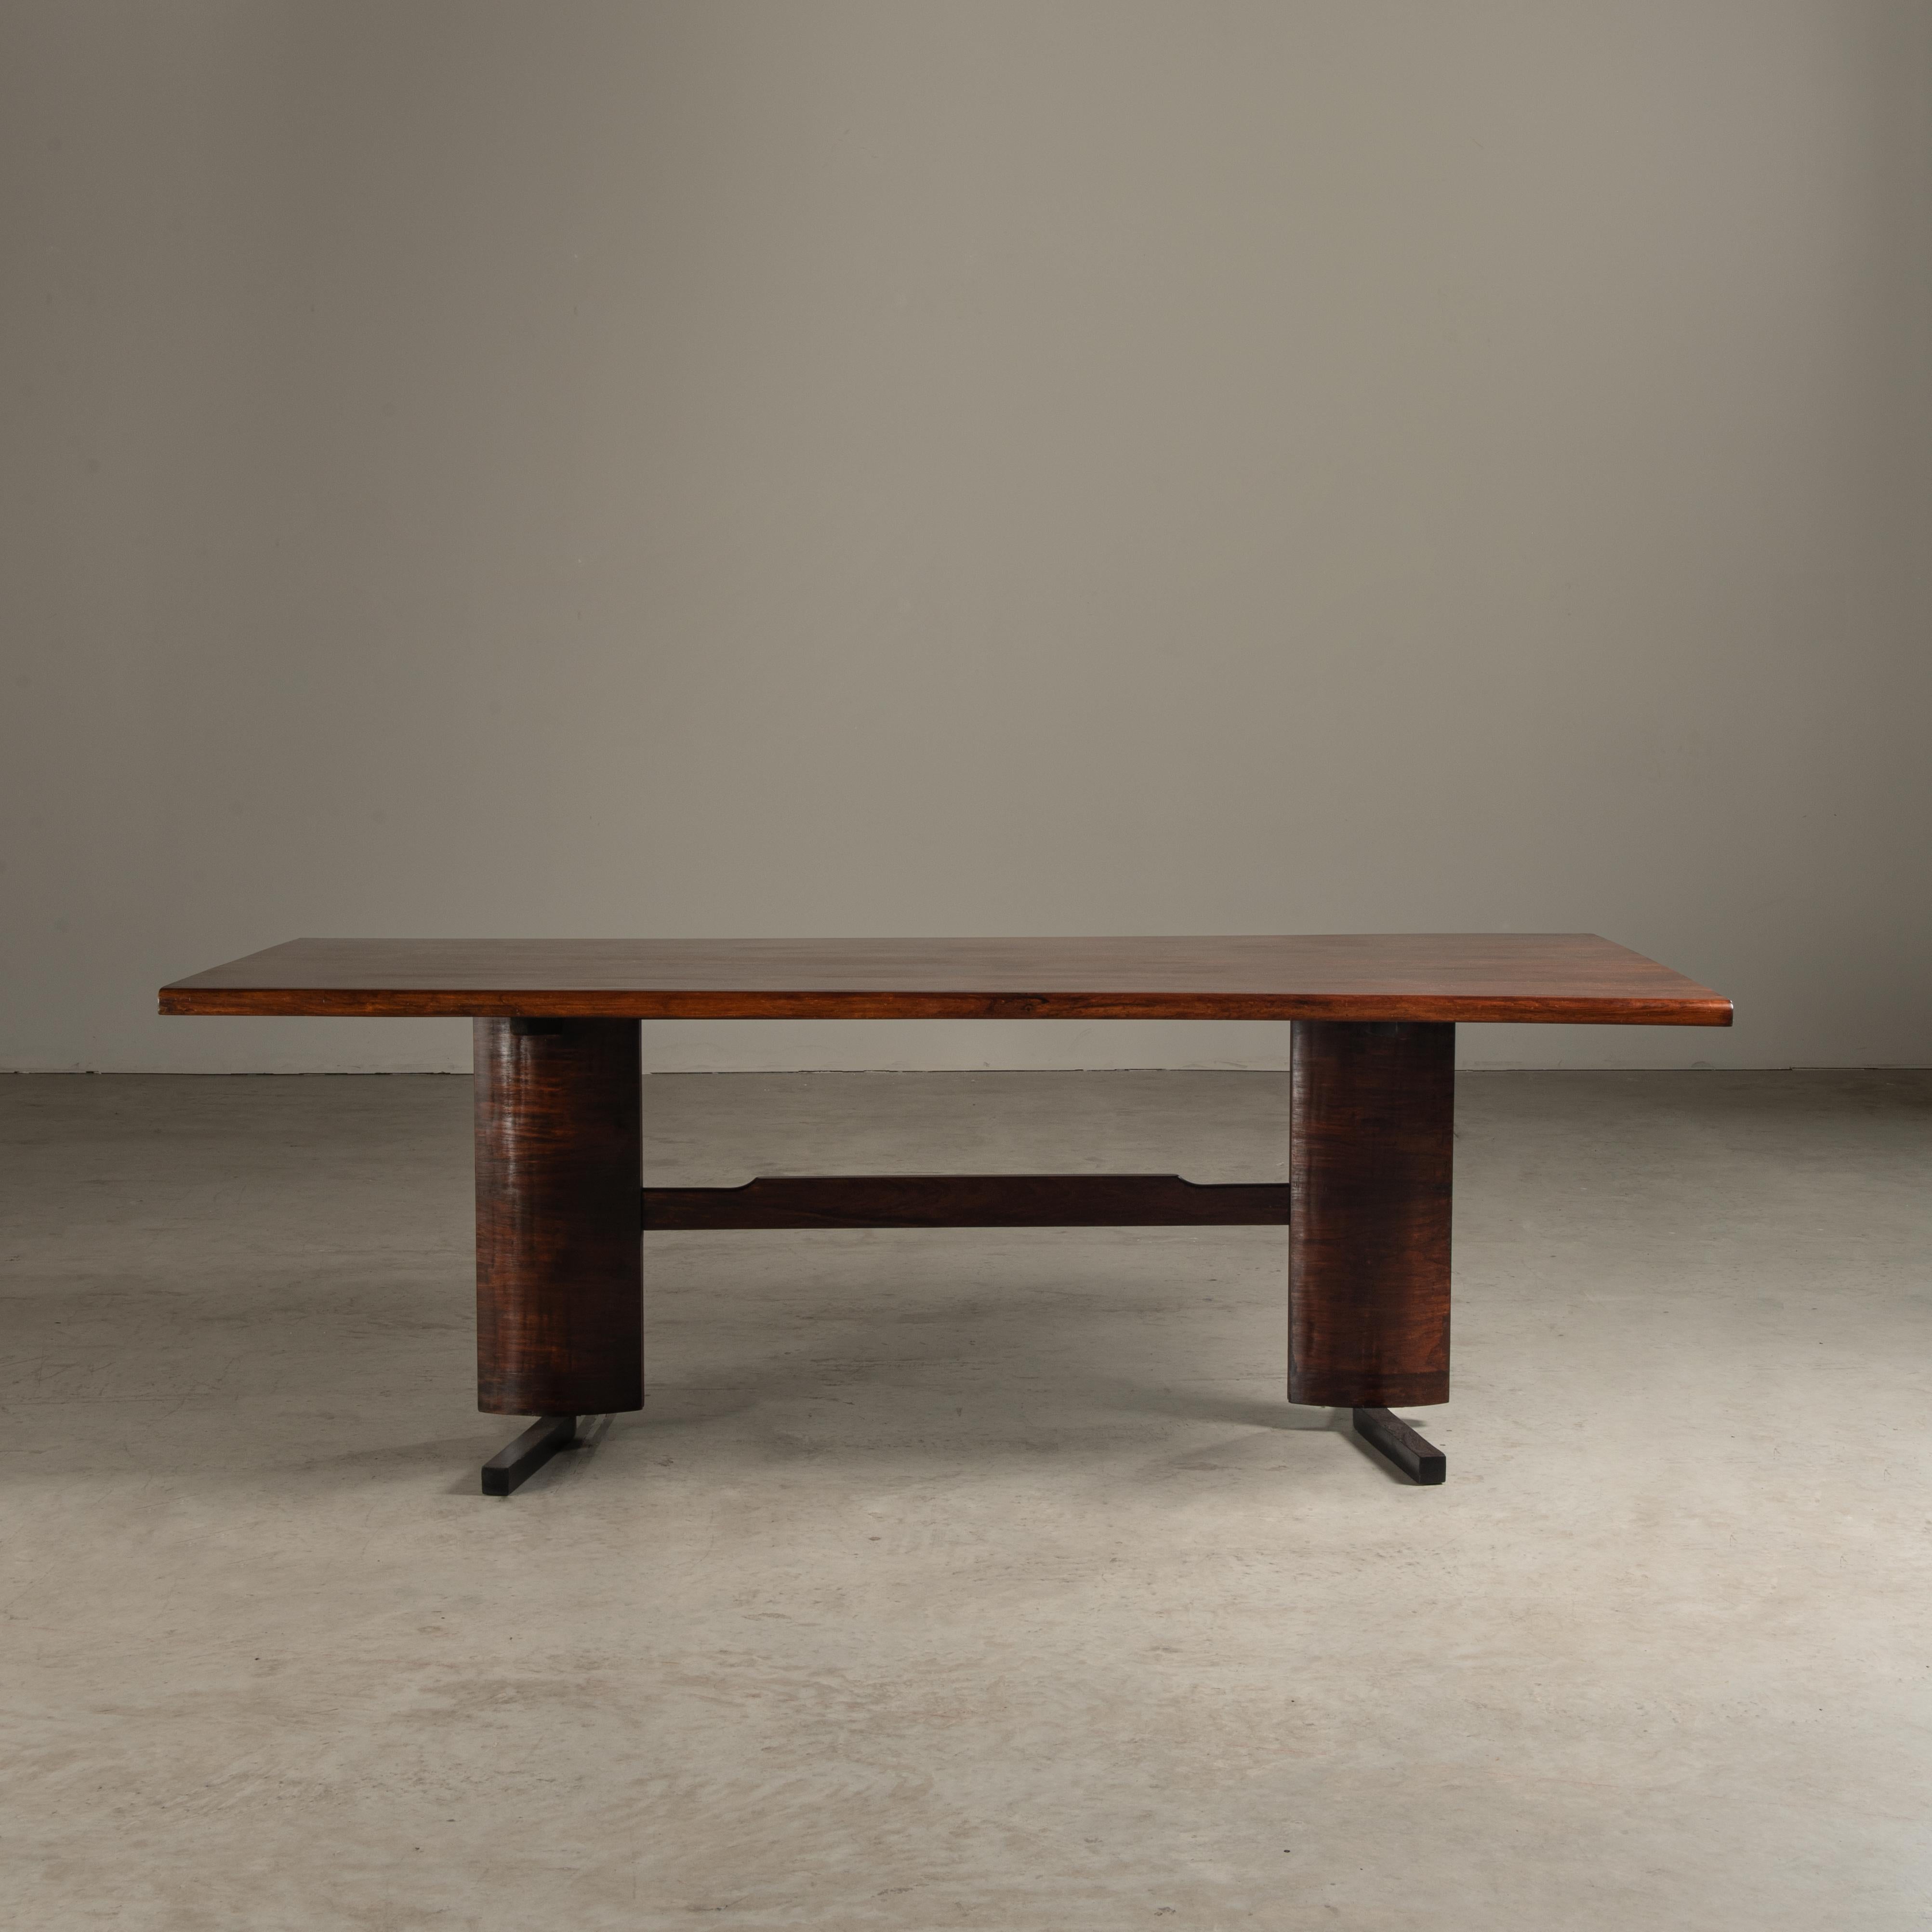 20th Century Dining Table in Hardwood, by Novo Rumo, Brazilian Mid-Century Modern For Sale